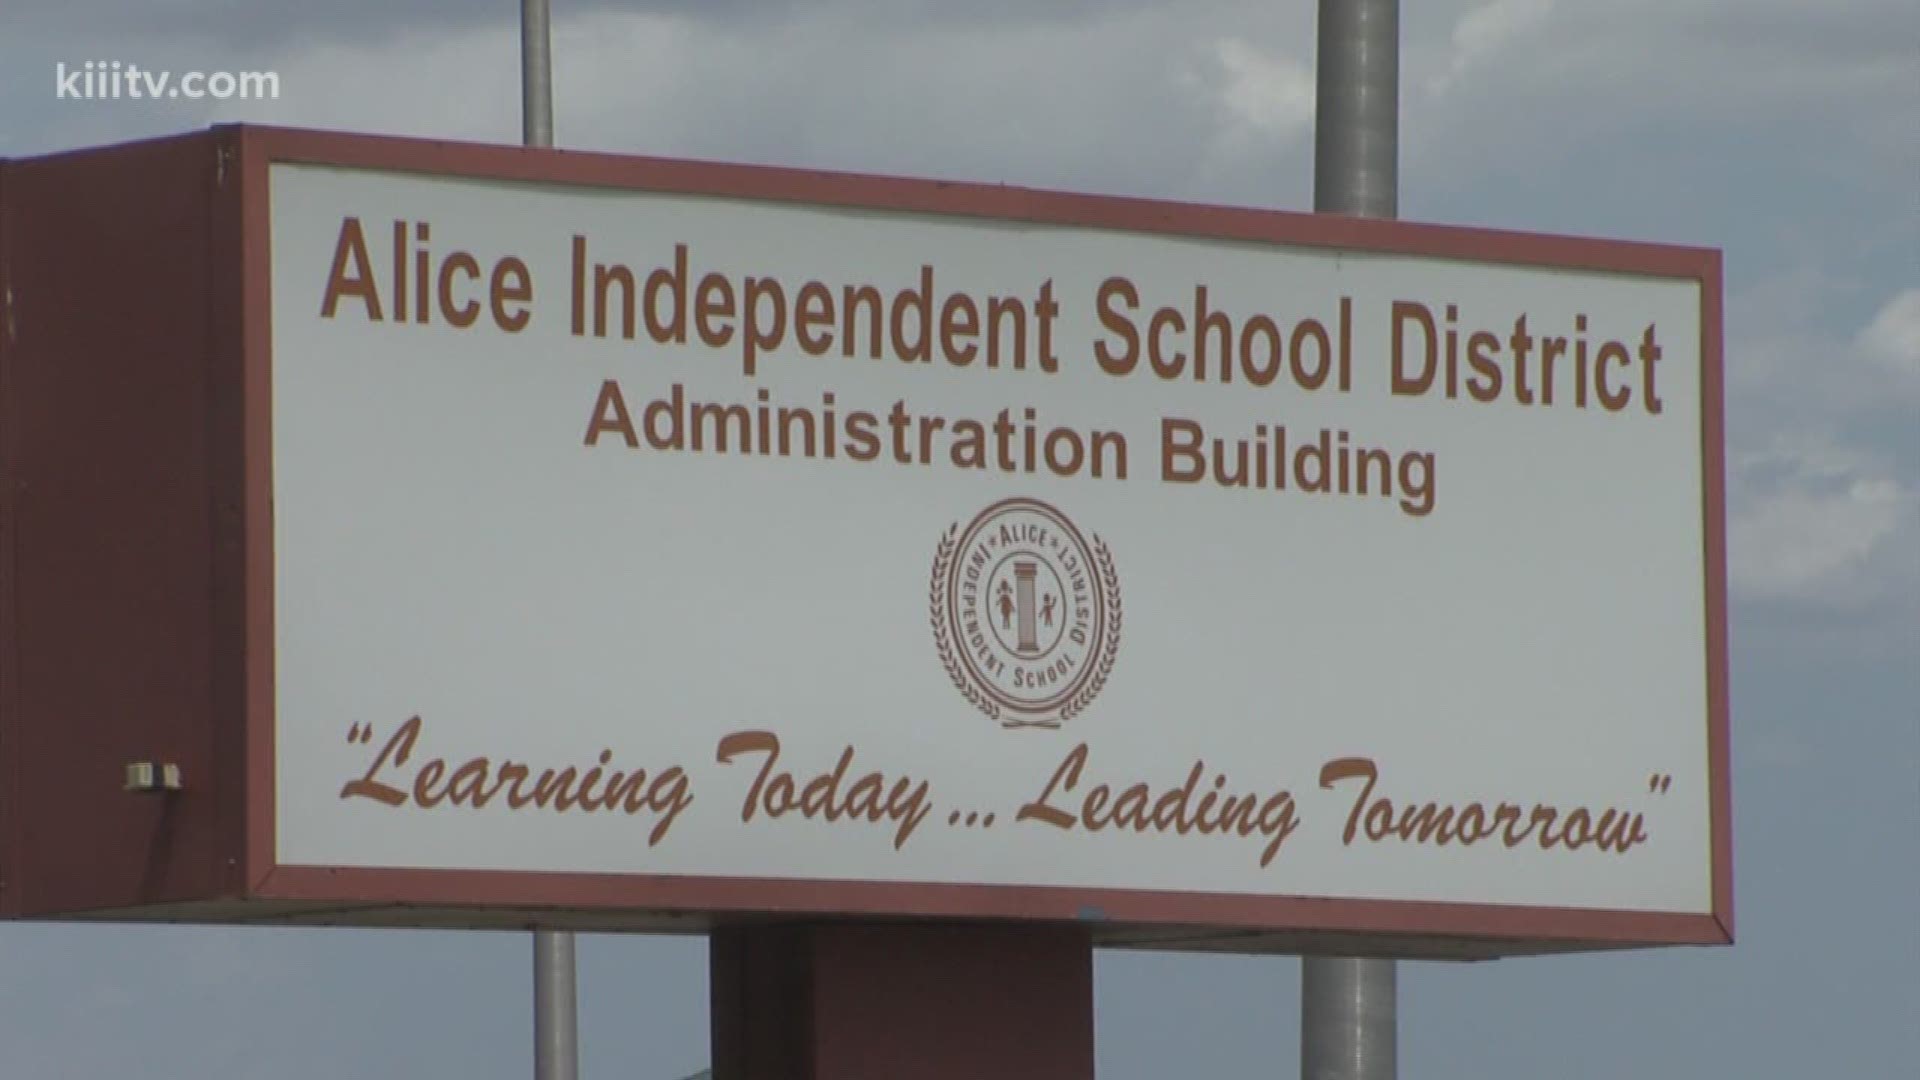 The Alice Independent School District board of trustees voted unanimously to approve salary increases for all personnel for the new school year.